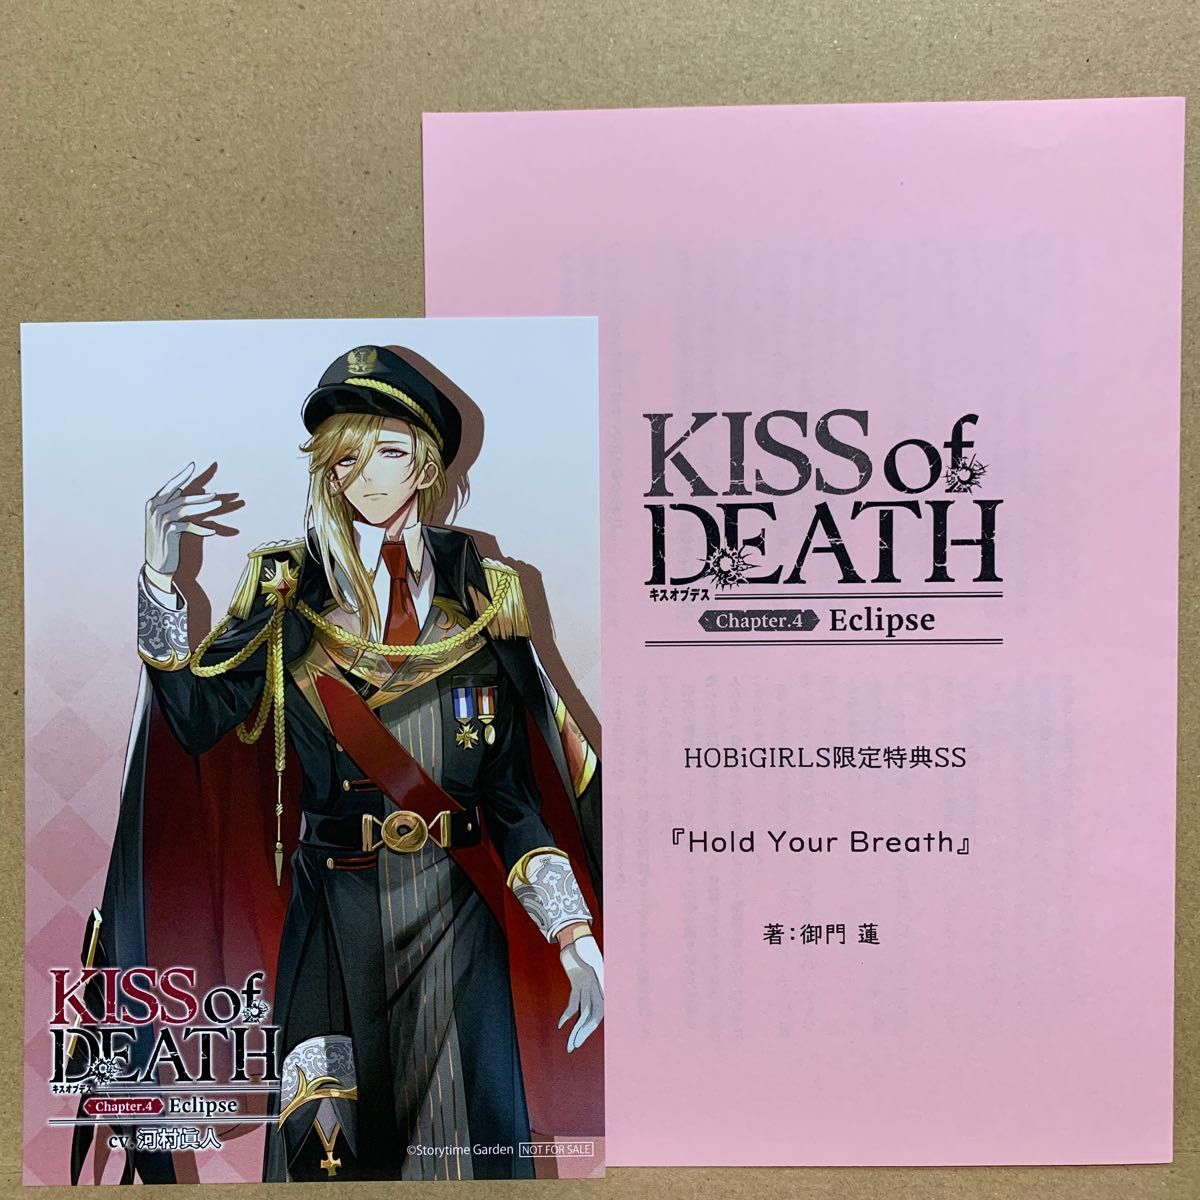 KISS of DEATH Chapter Eclipse 河村眞人 全特典付き ドラマCD｜PayPayフリマ